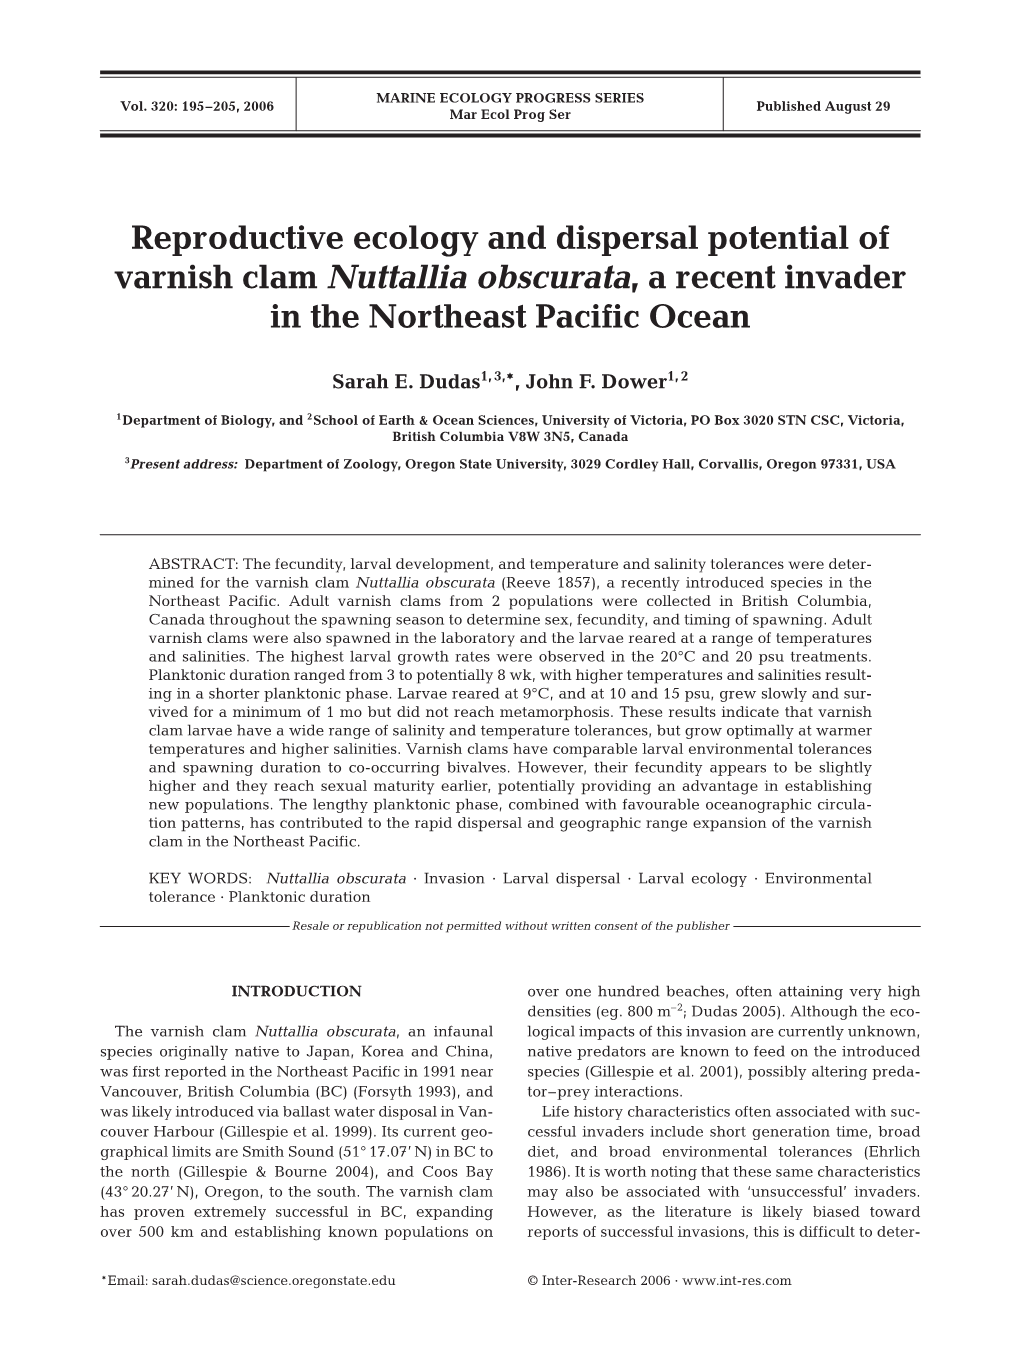 Reproductive Ecology and Dispersal Potential of Varnish Clam Nuttallia Obscurata, a Recent Invader in the Northeast Pacific Ocean